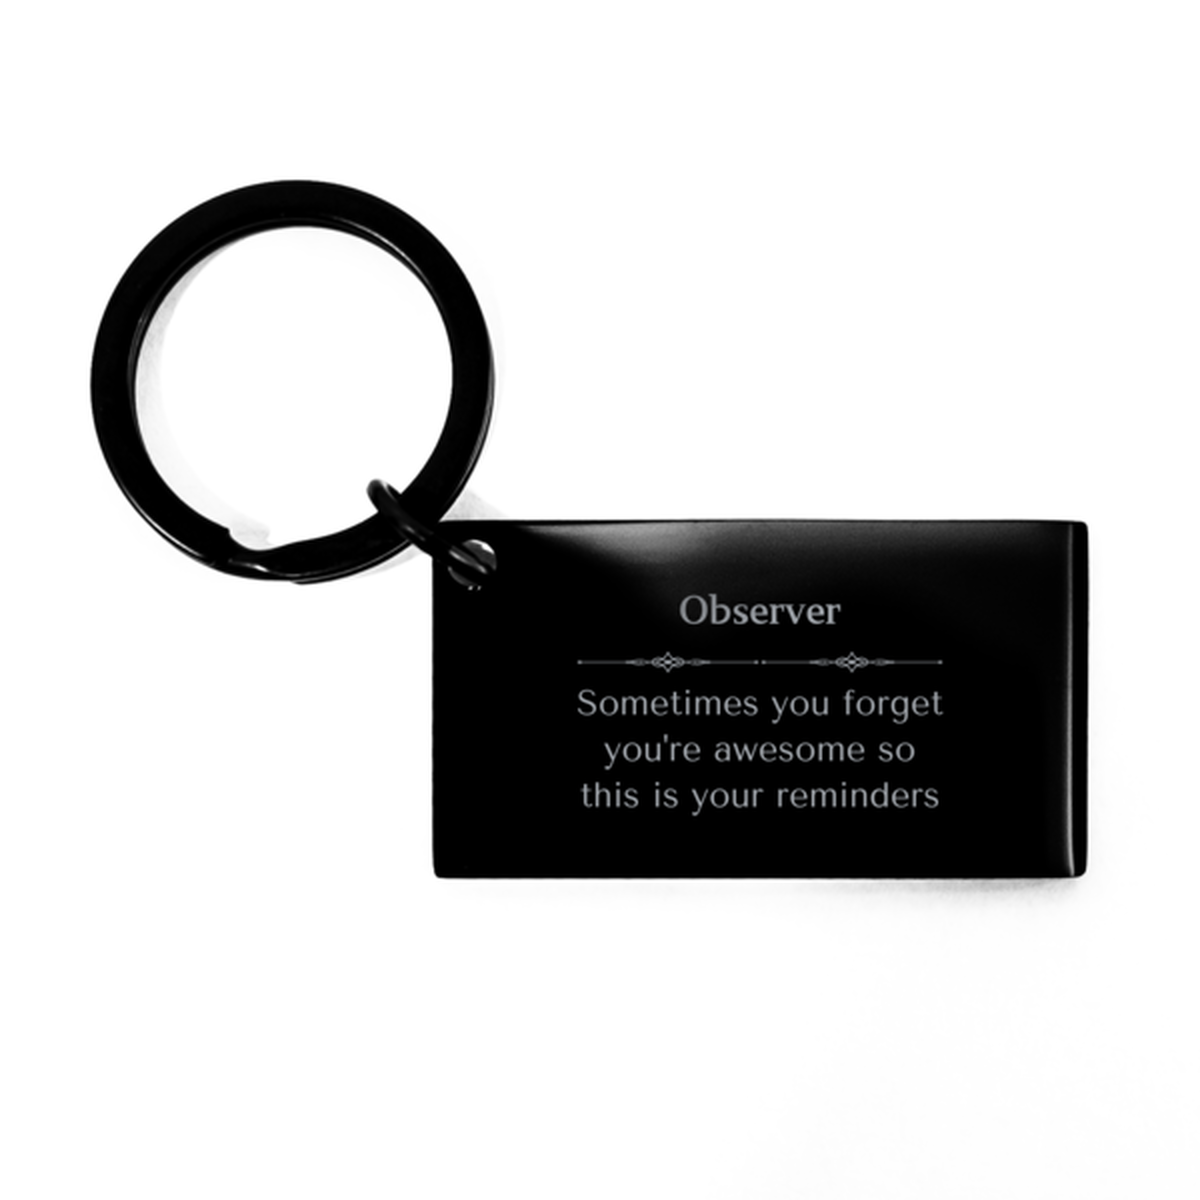 Sentimental Observer Keychain, Pharmacy Technician Sometimes you forget you're awesome so this is your reminders, Graduation Christmas Birthday Gifts for Observer, Men, Women, Coworkers